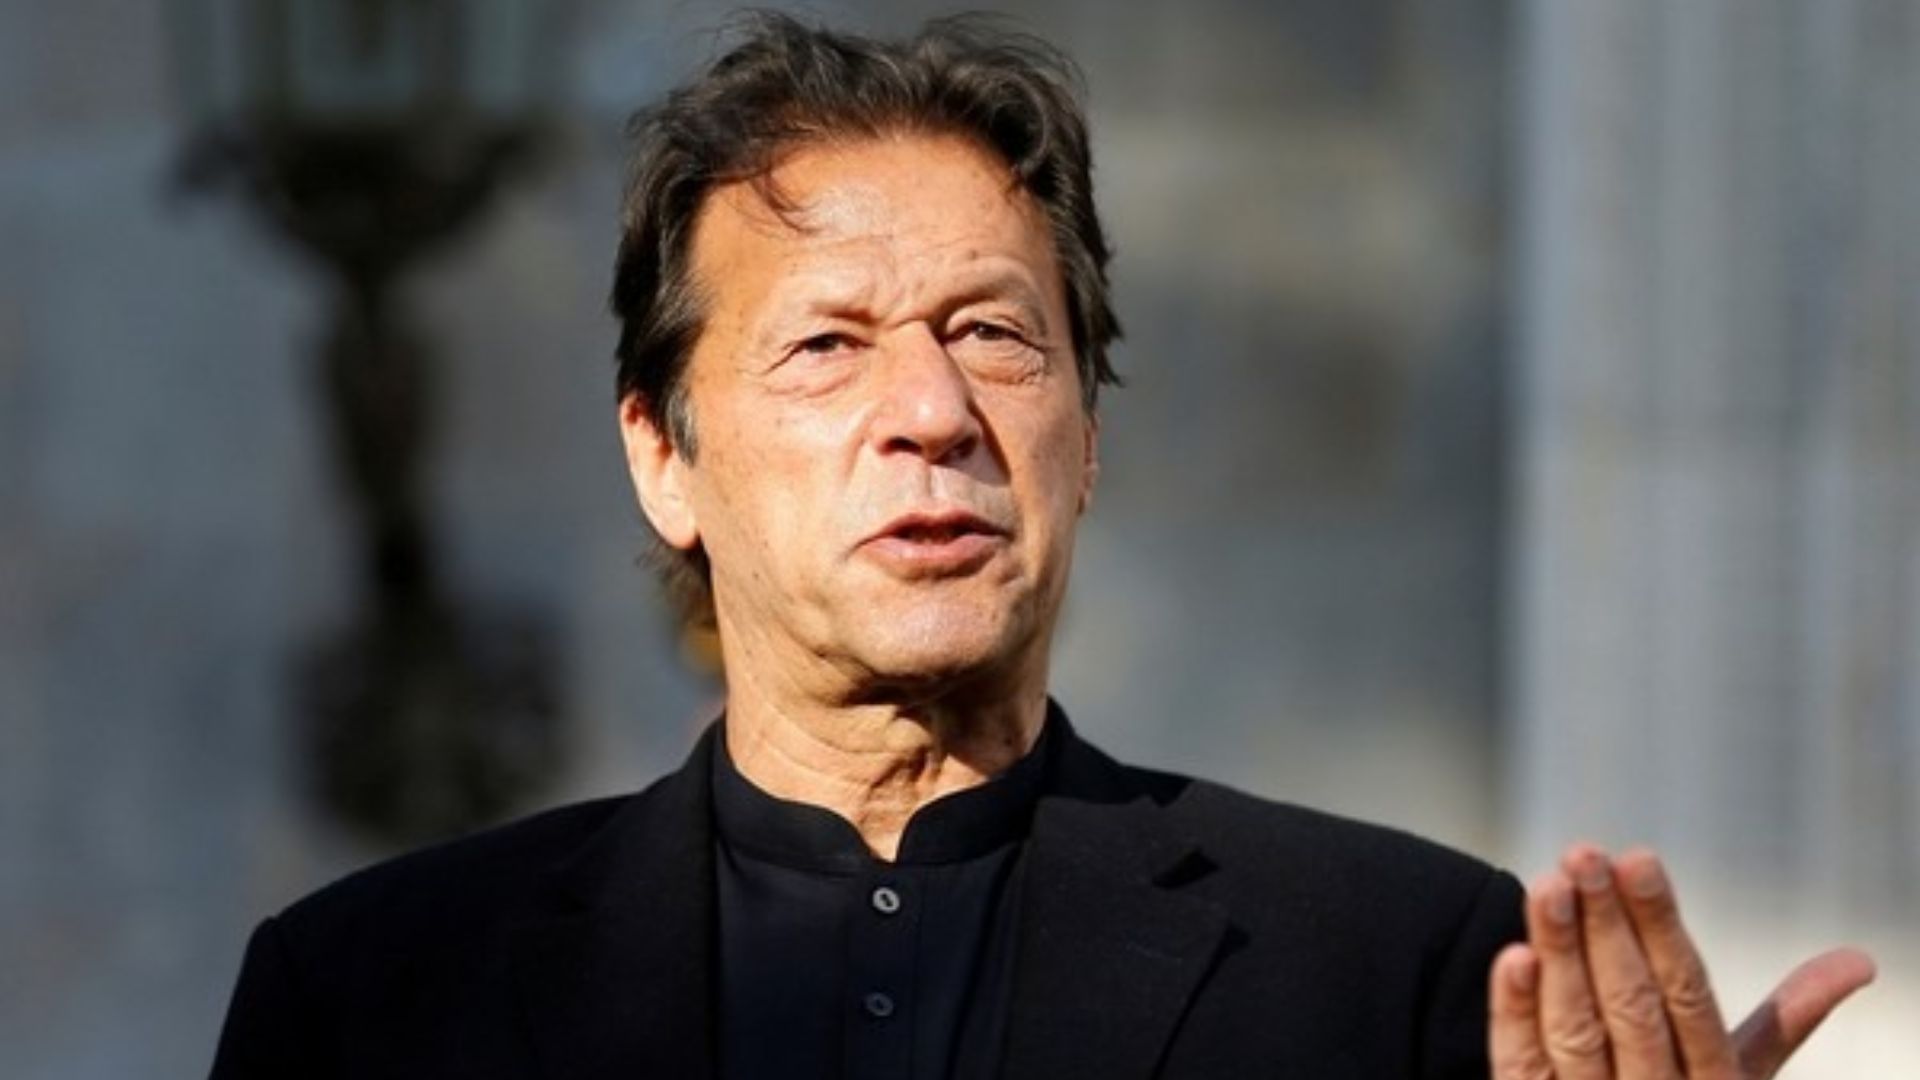 Imran Khan questions transparency of polls, calls upcoming elections ‘mother of all selections’